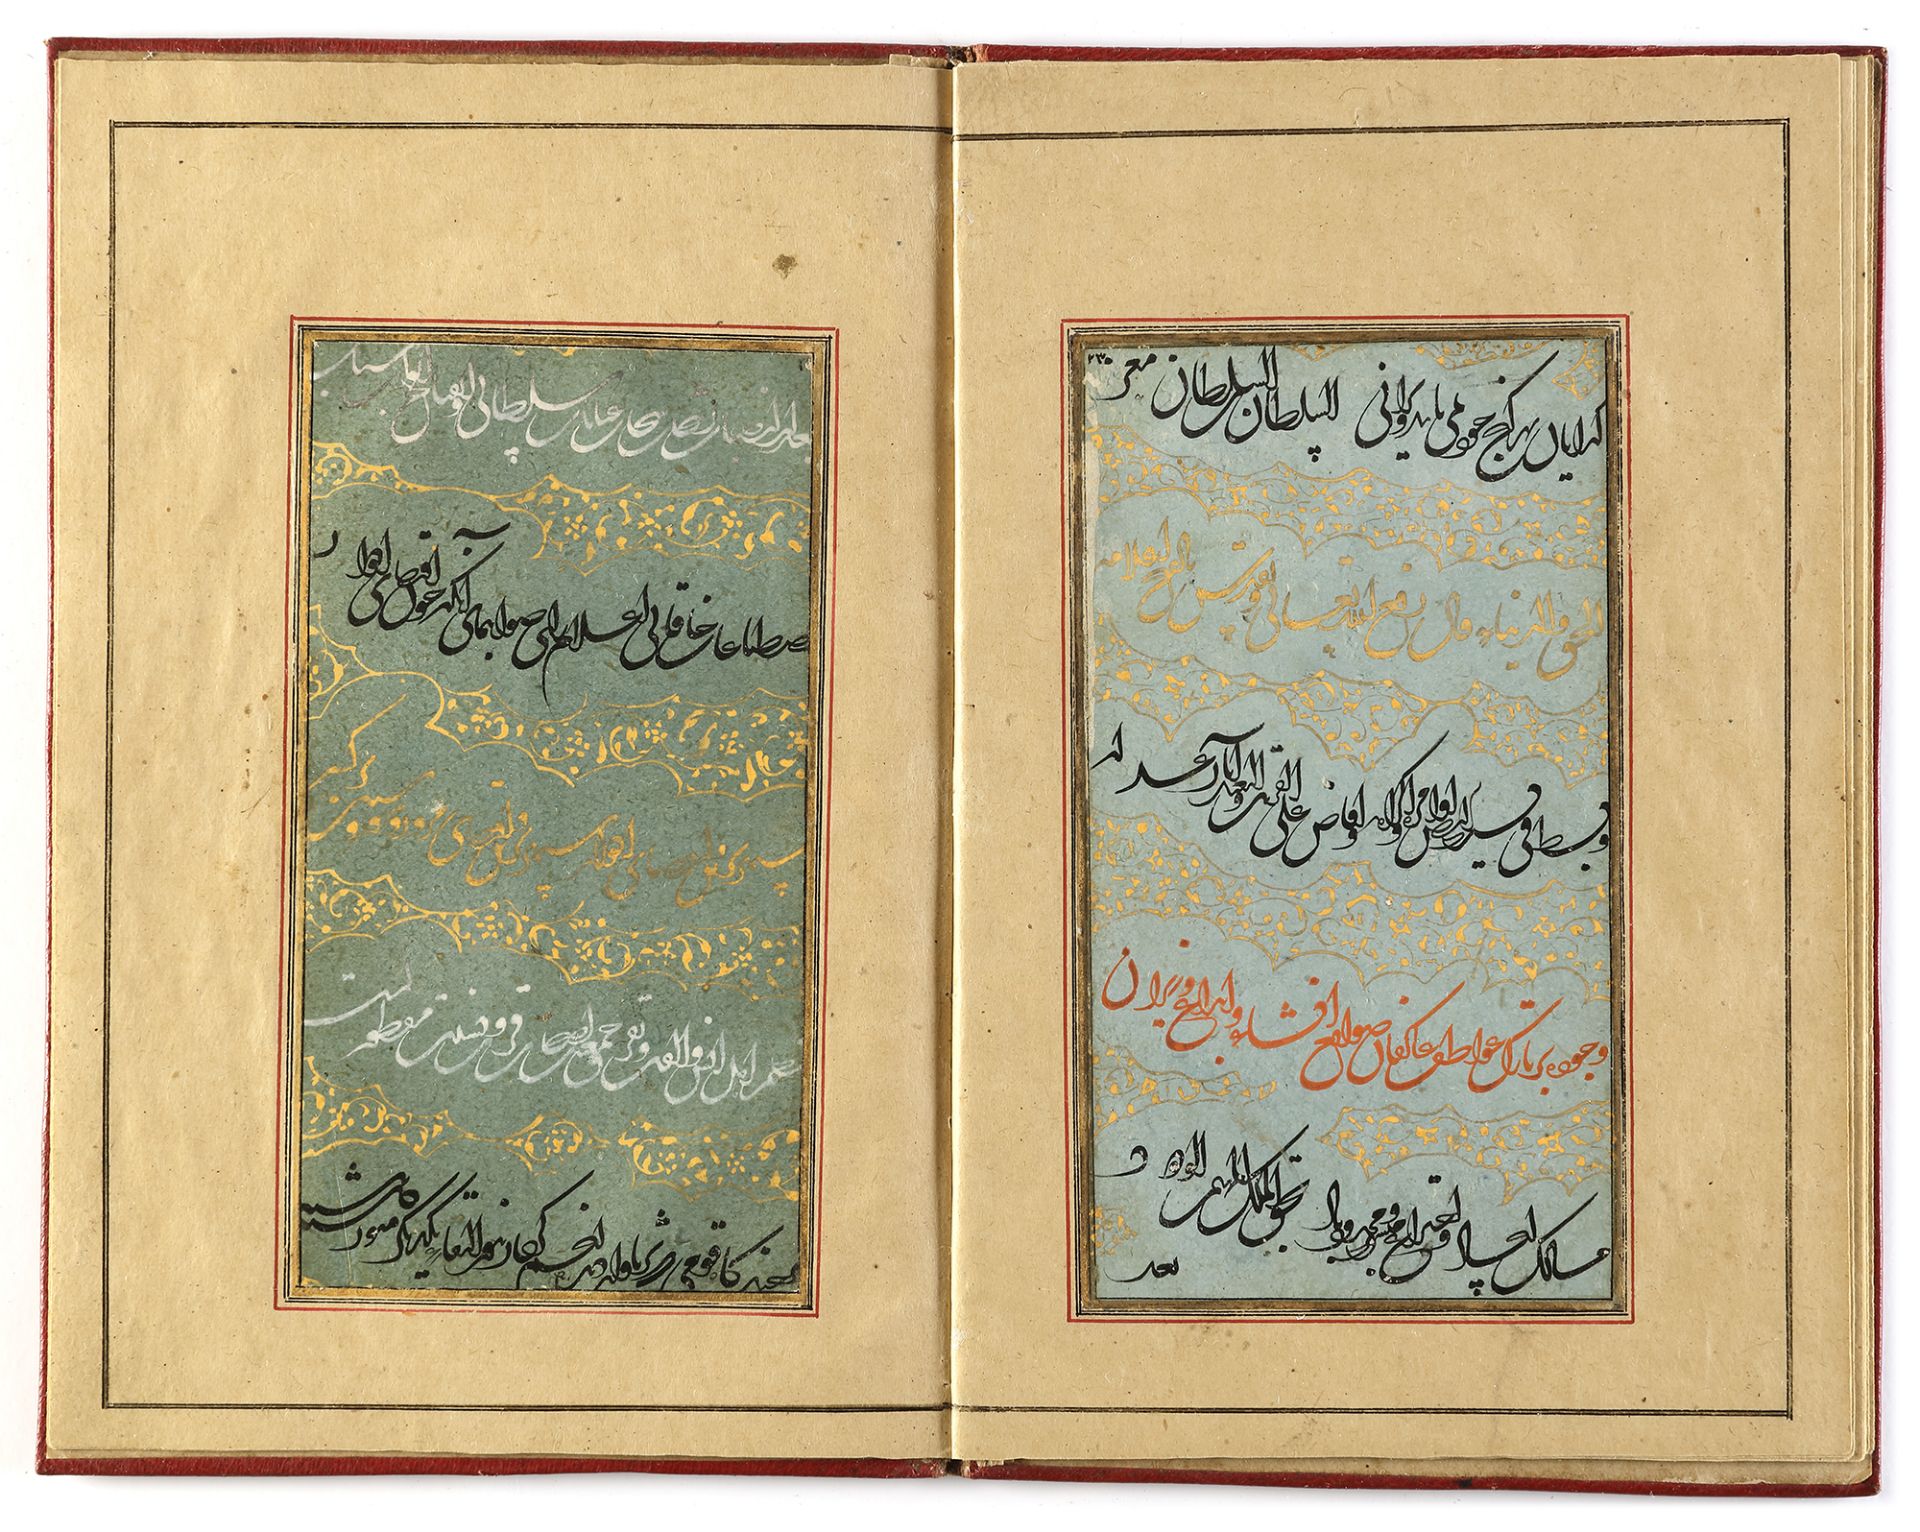 A MANUSCRIPT OF POETRY, SIGNED BY IKHTIYAR AL-MUNSHI, PERSIA, SAVAFID, DATED 975 AH/1567-68 AD - Image 18 of 18